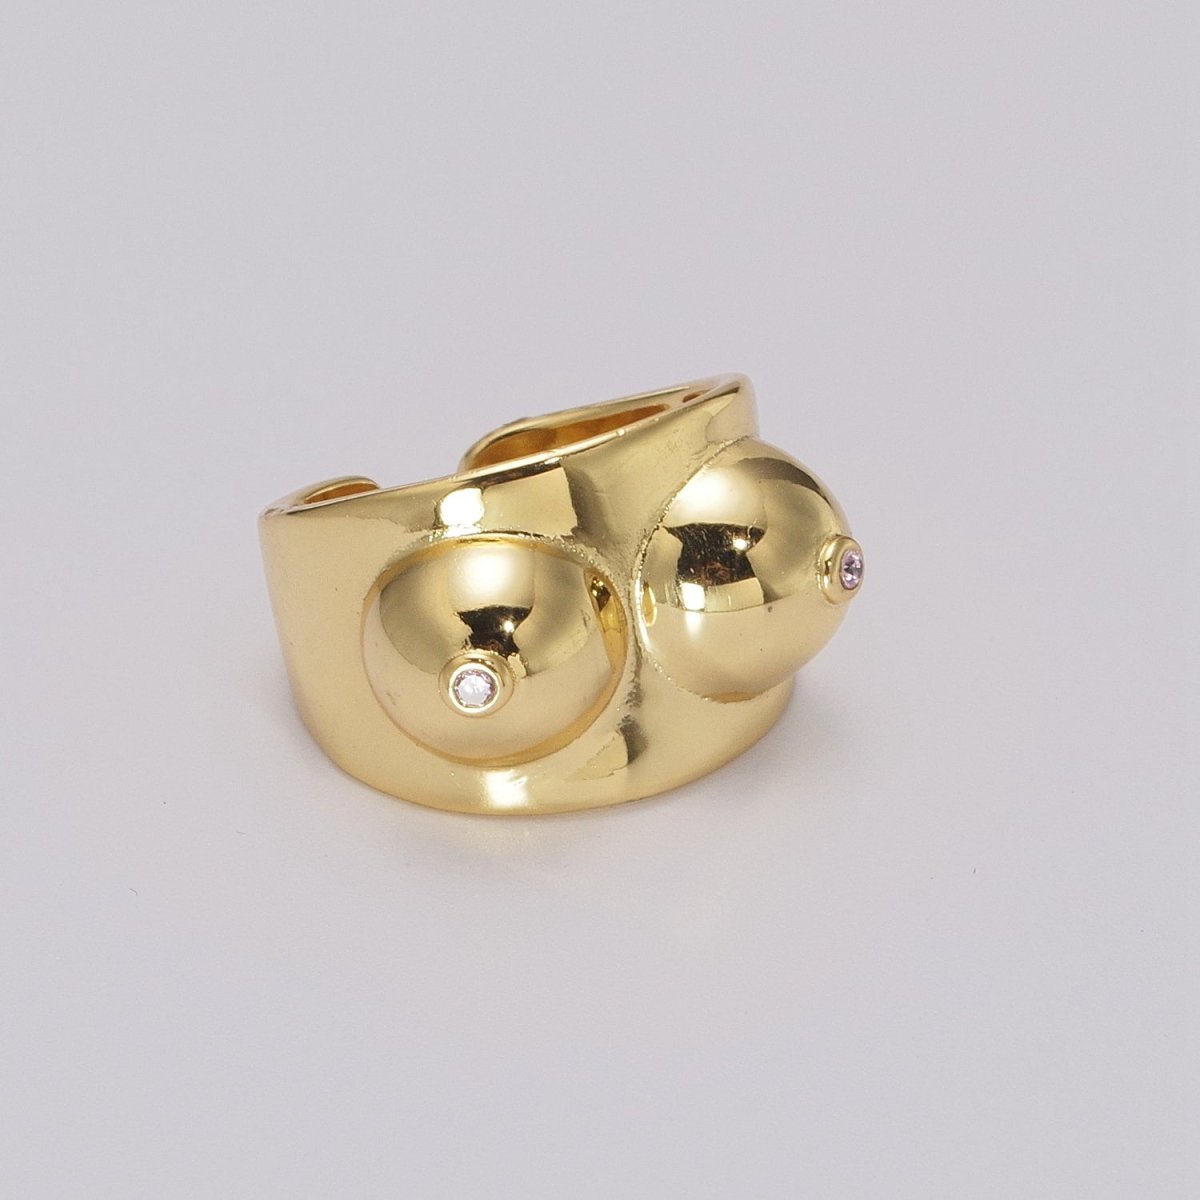 Gold Boobs Ring Novelty Silver Breast Cancer Awareness. Celebrating Breastfeeding Jewelry Gold Boobs Ring Novelty Silver Breast Cancer Awareness. Celebrating Breastfeeding Jewelry U-025 U-026 - DLUXCA